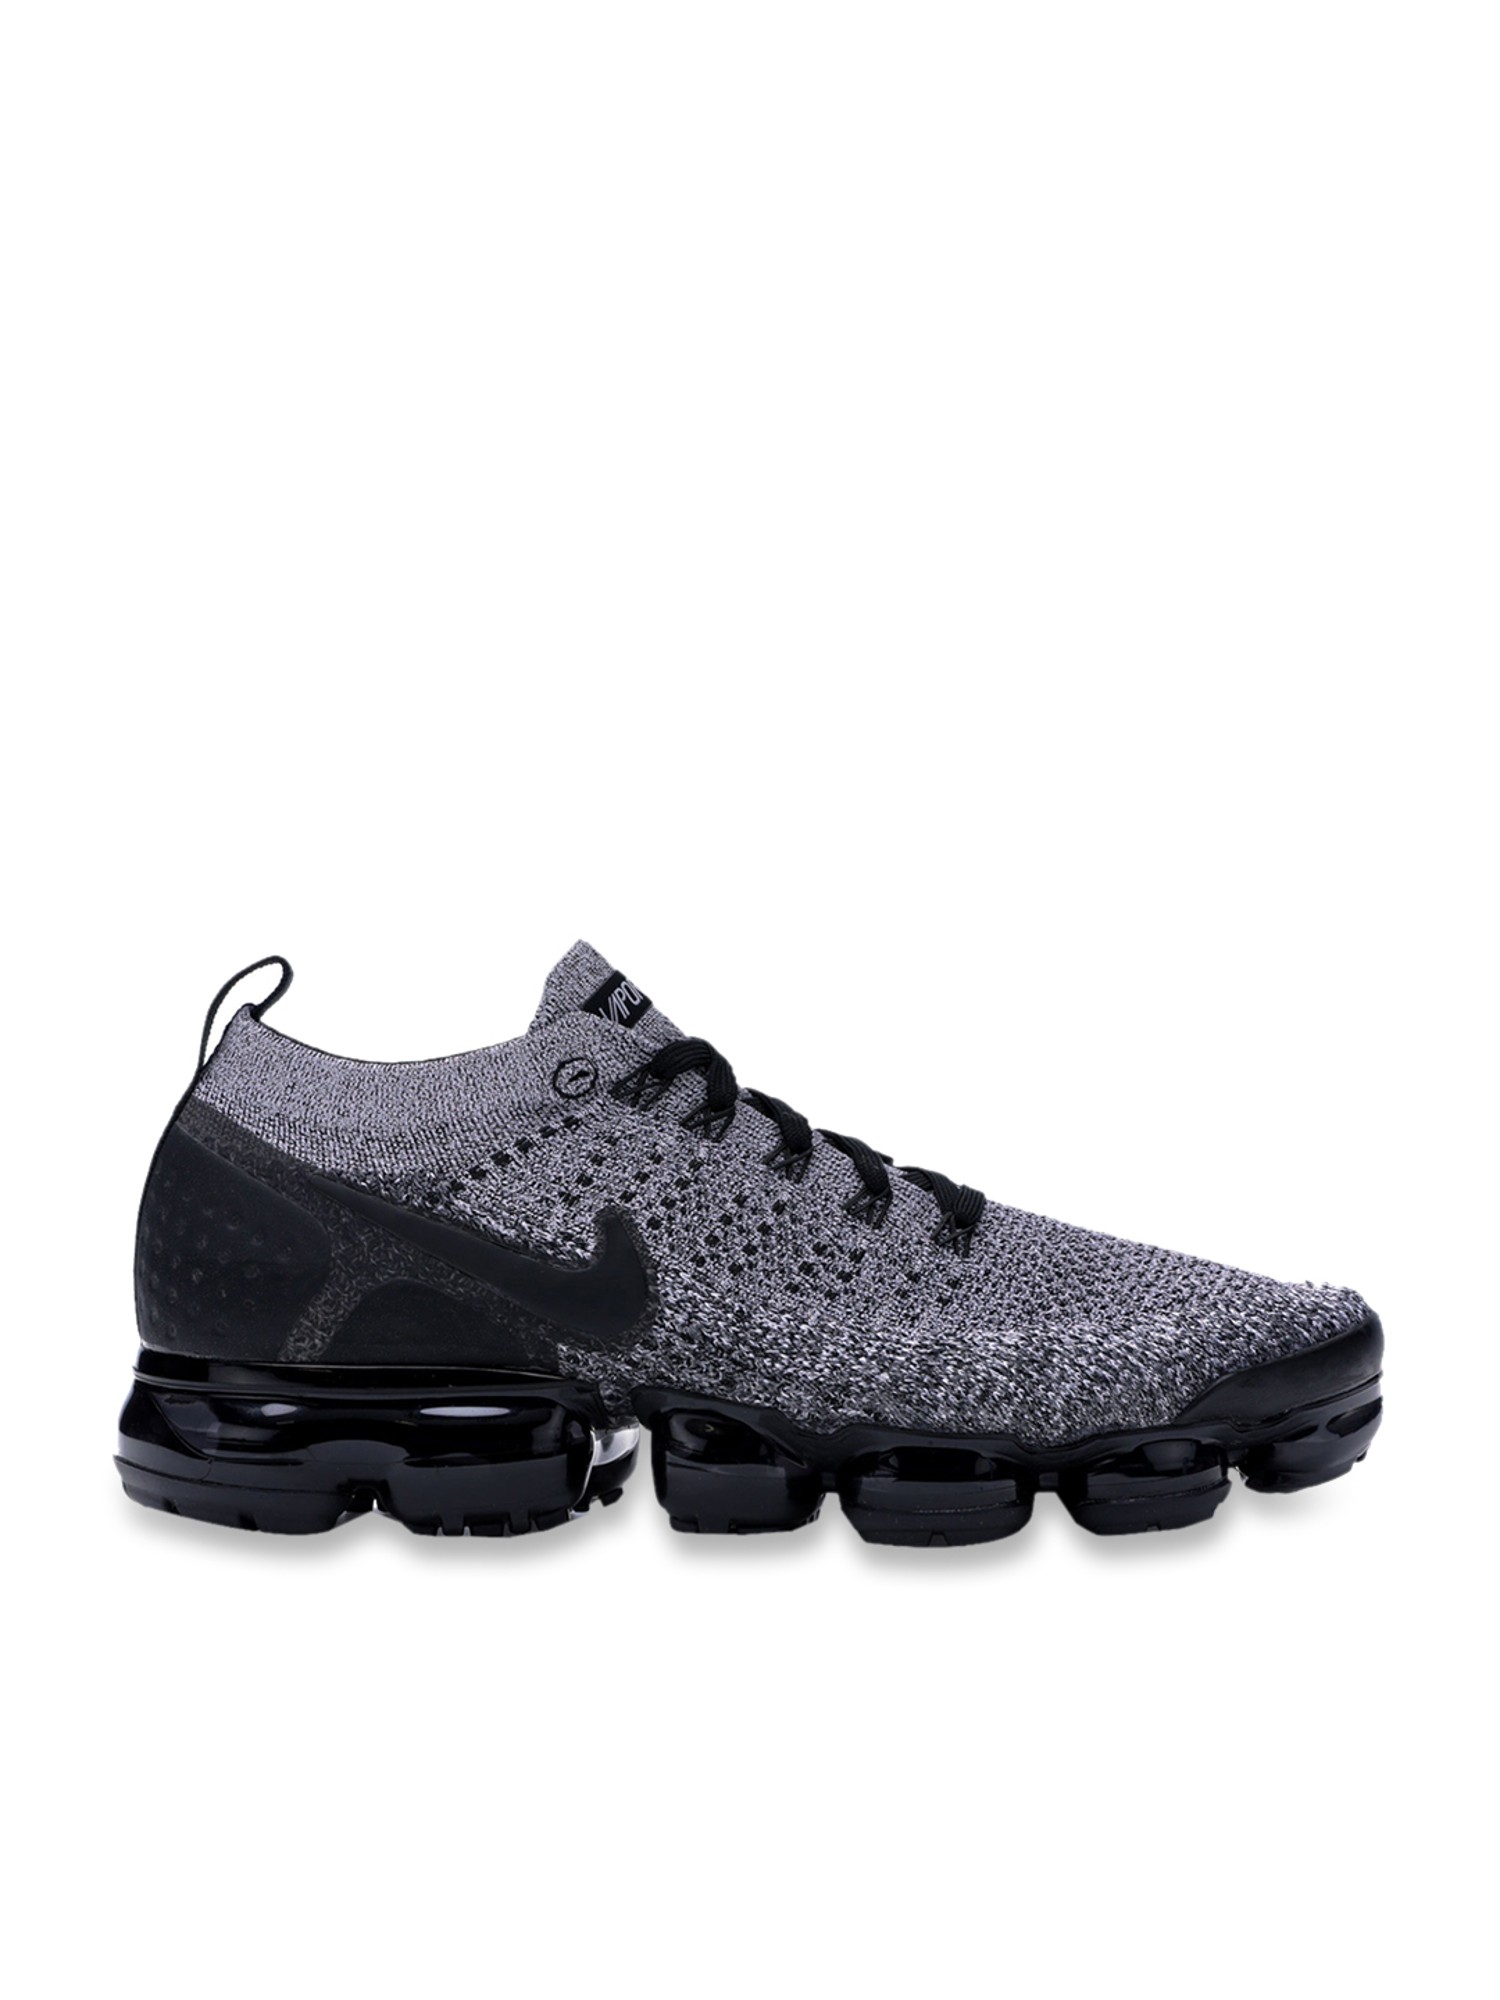 nike vapormax shoes online india